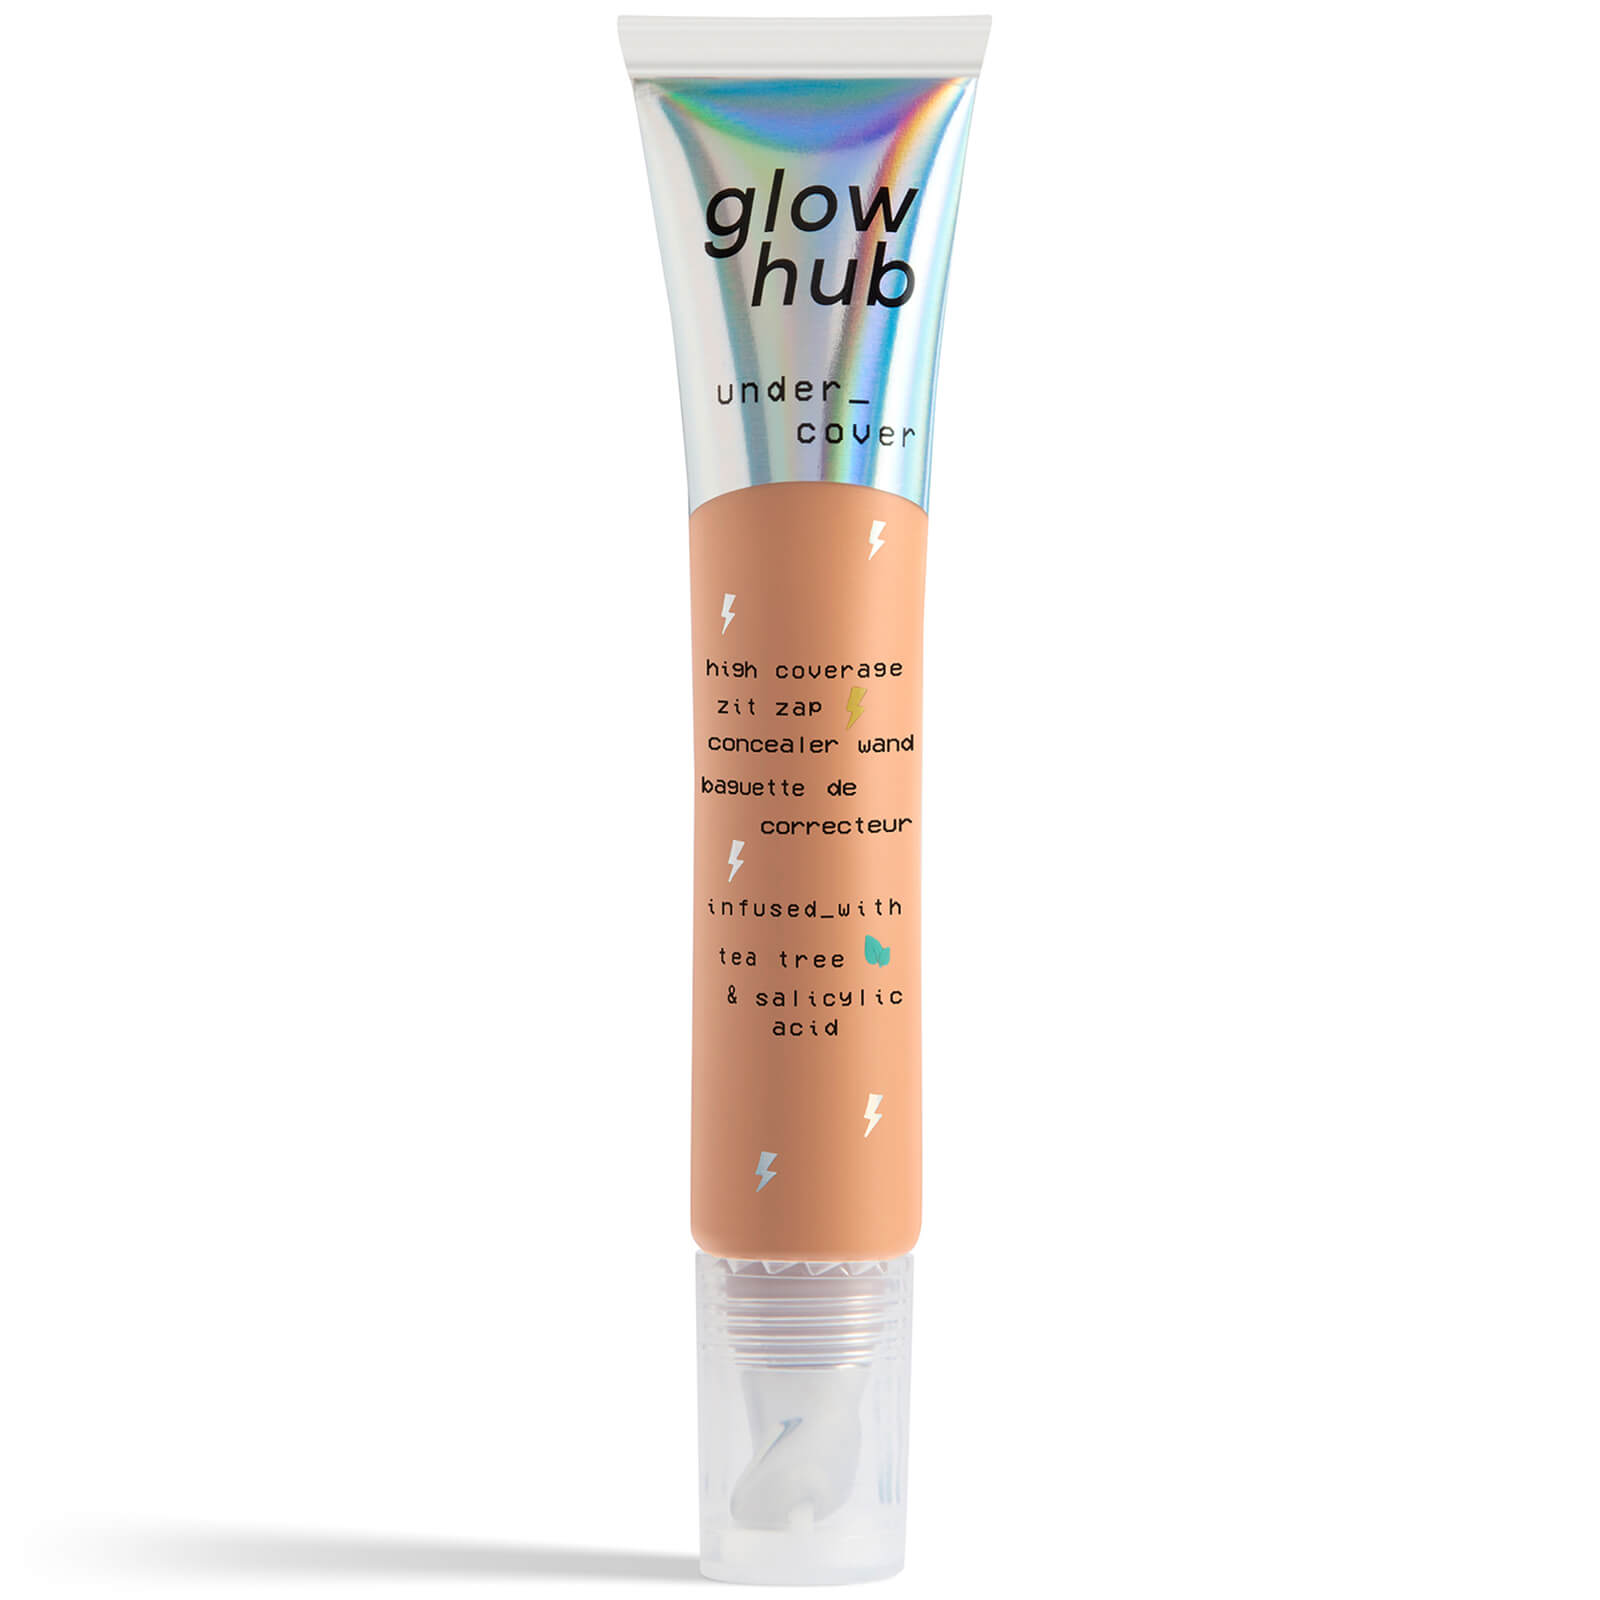 Glow Hub Under Cover High Coverage Zit Zap Concealer Wand 15ml (various Shades) - 11c In Neutral